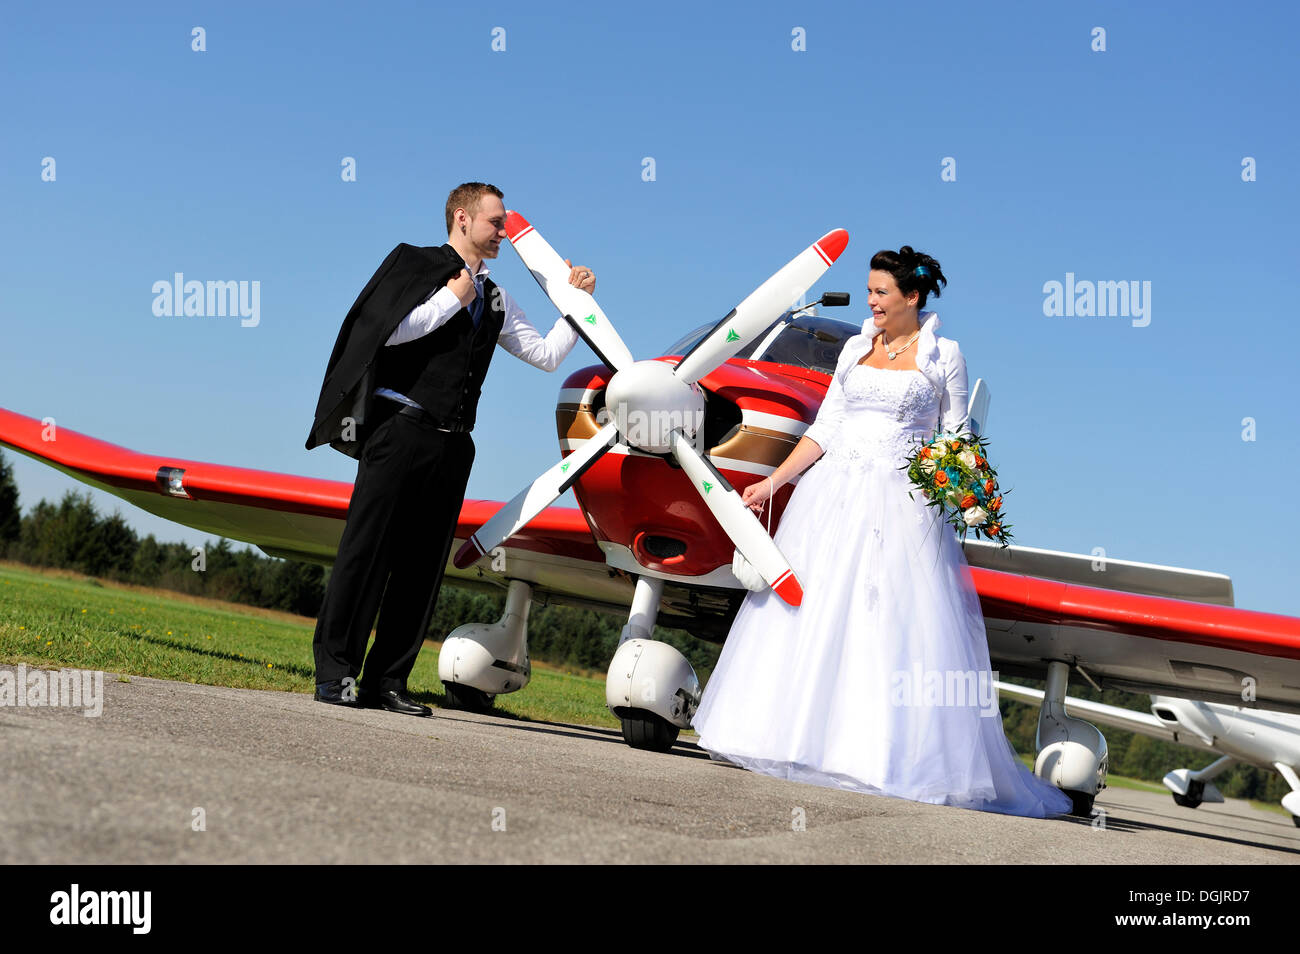 Young bridal couple posing in front of a propeller plane Stock Photo